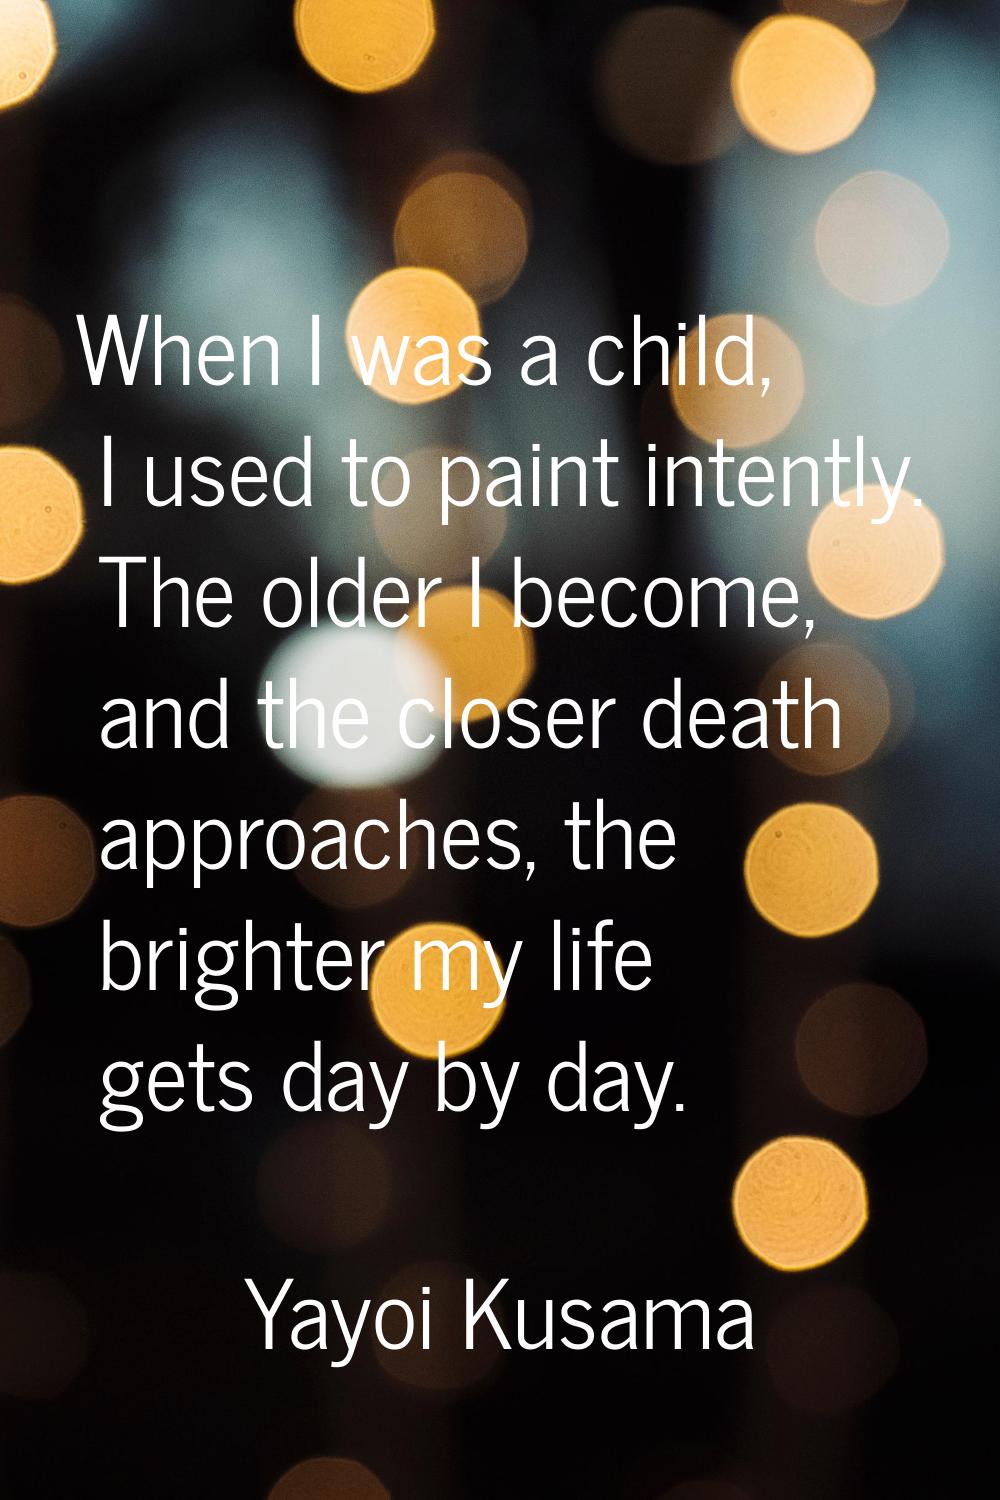 When I was a child, I used to paint intently. The older I become, and the closer death approaches, 